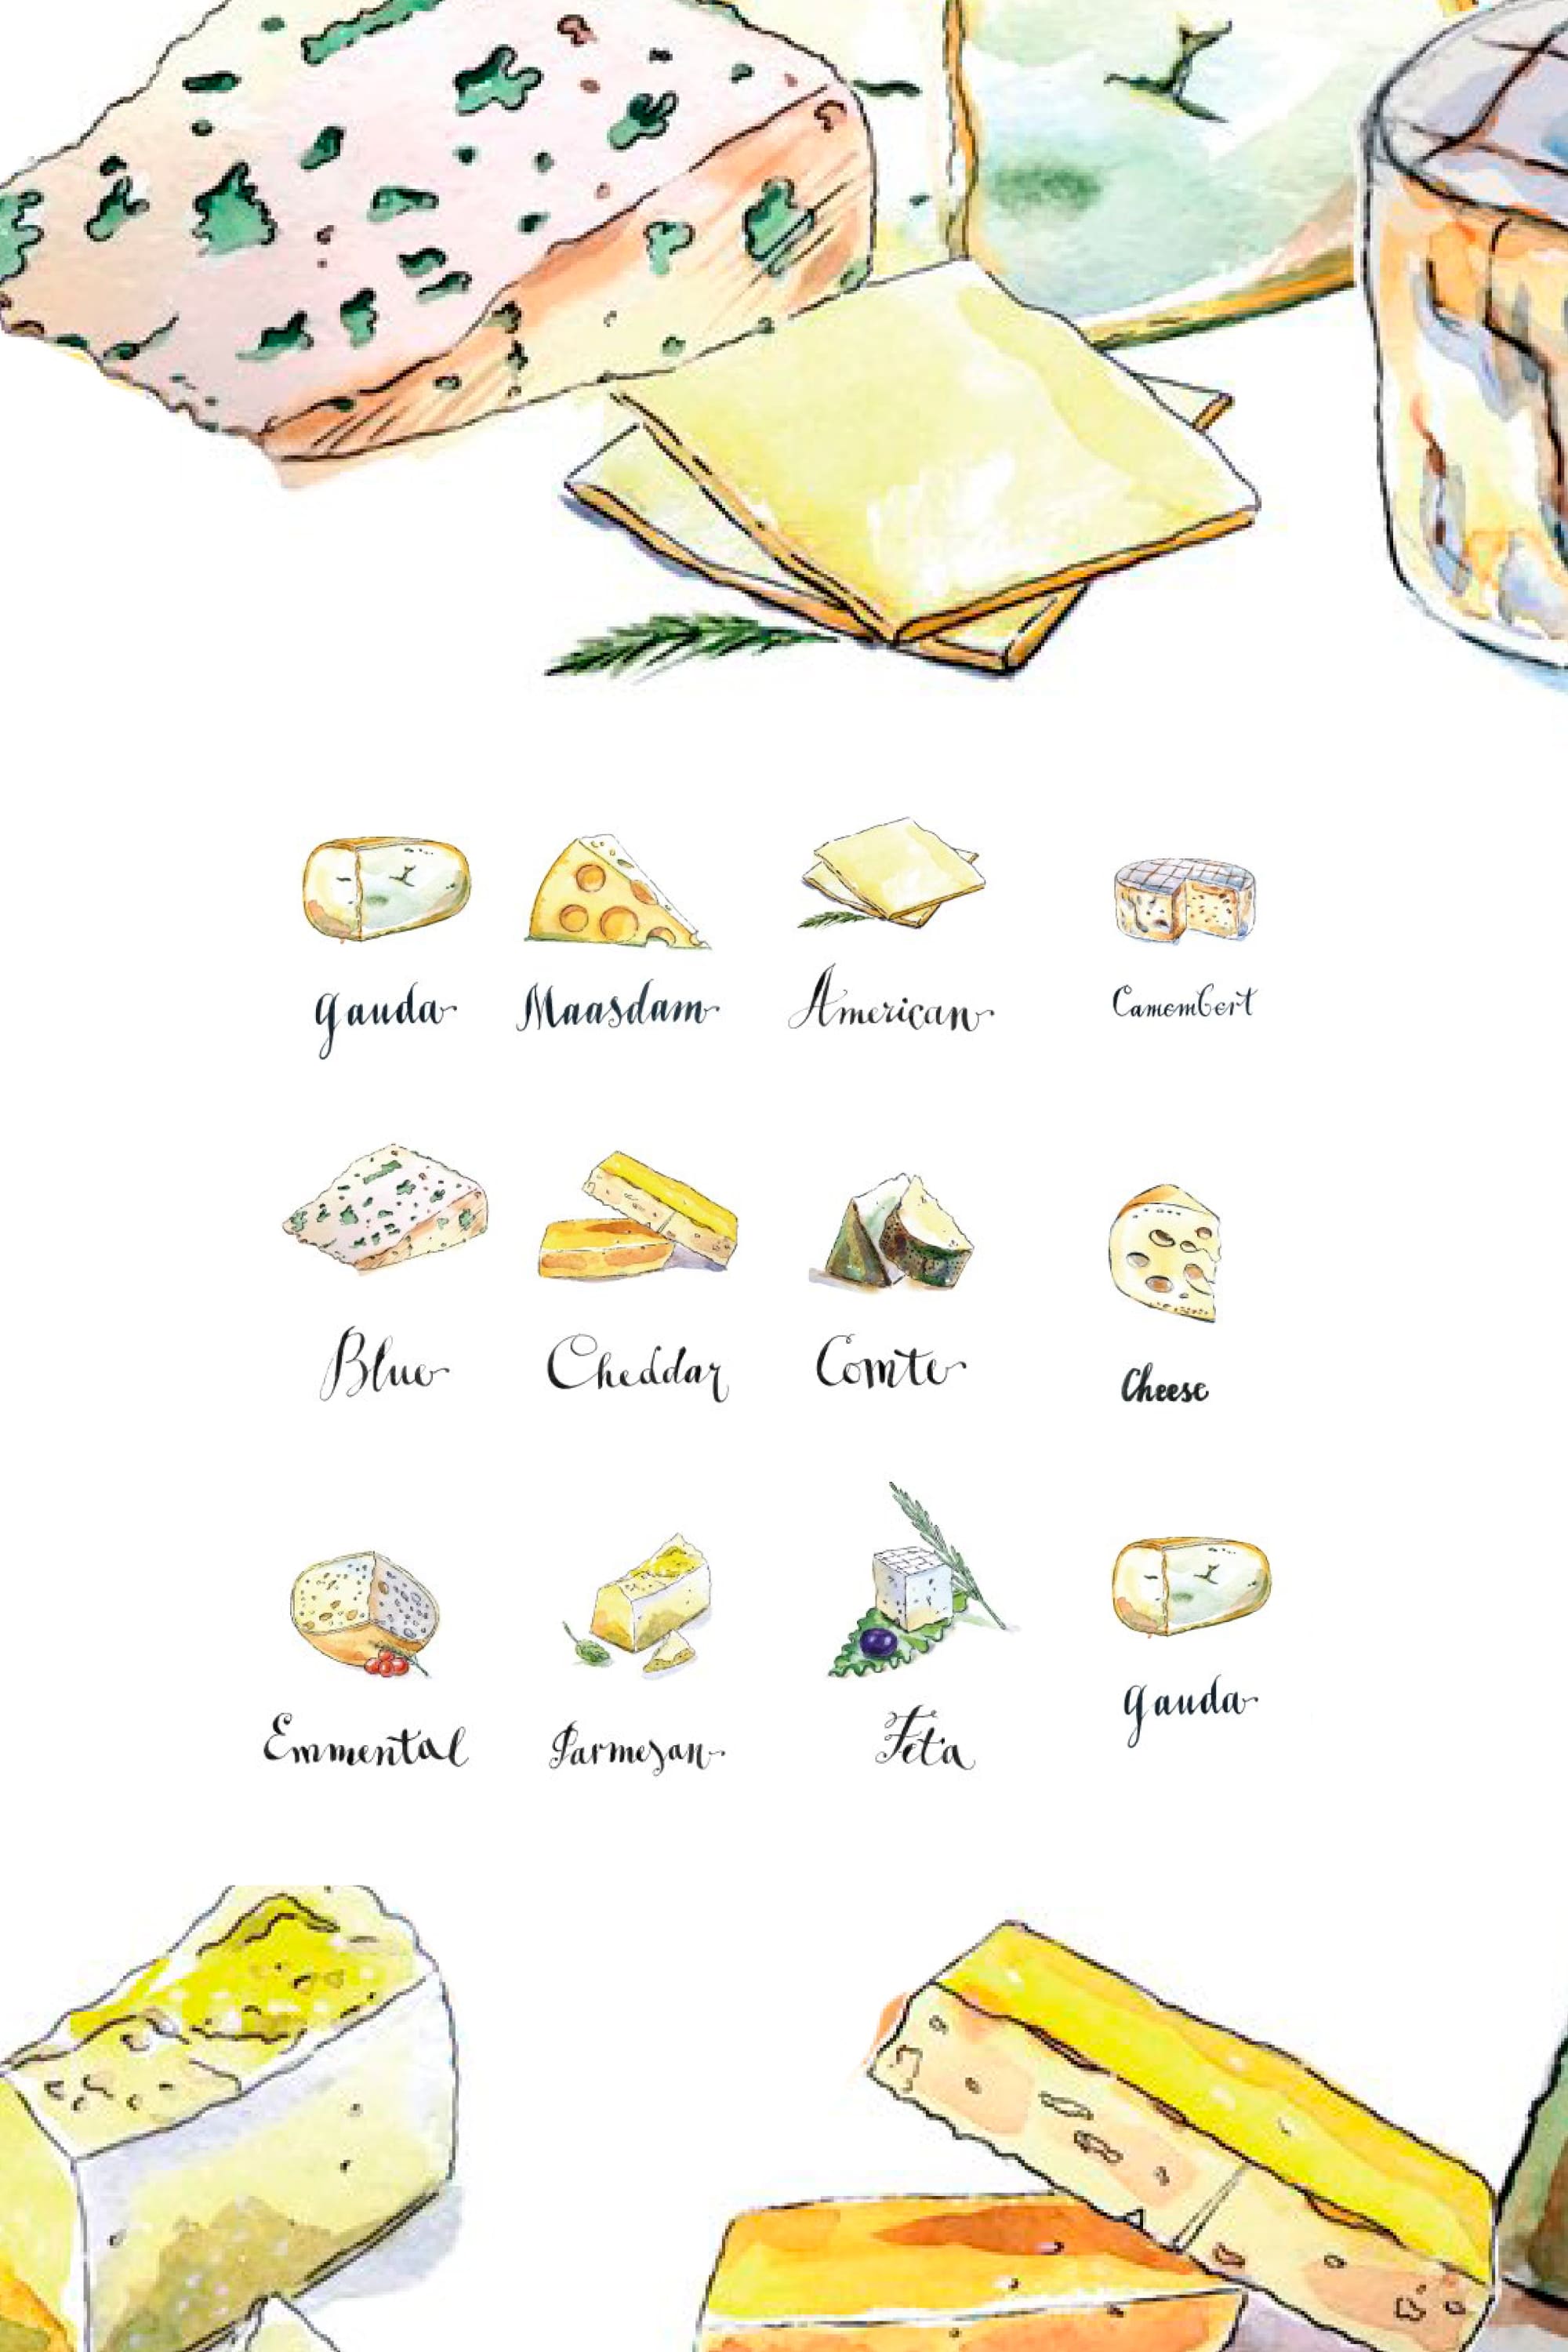 Lovely watercolor illustrations of different types of cheeses.